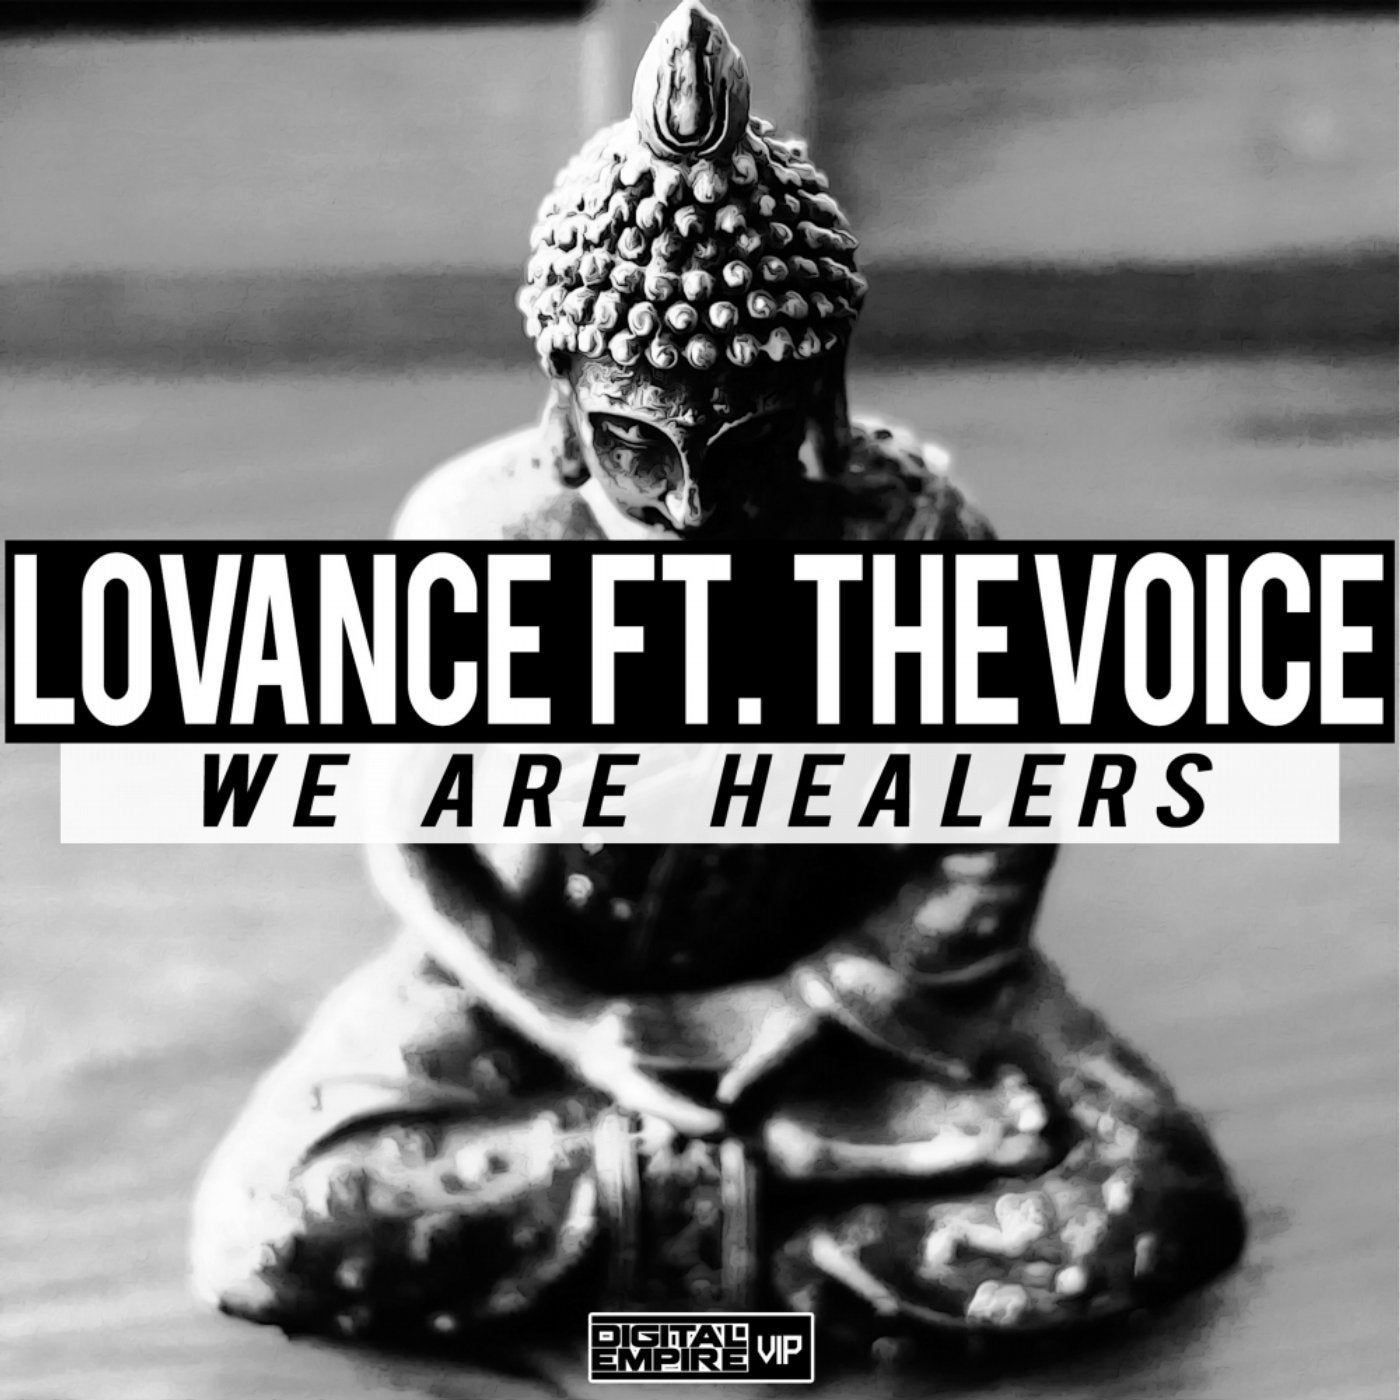 We Are Healers